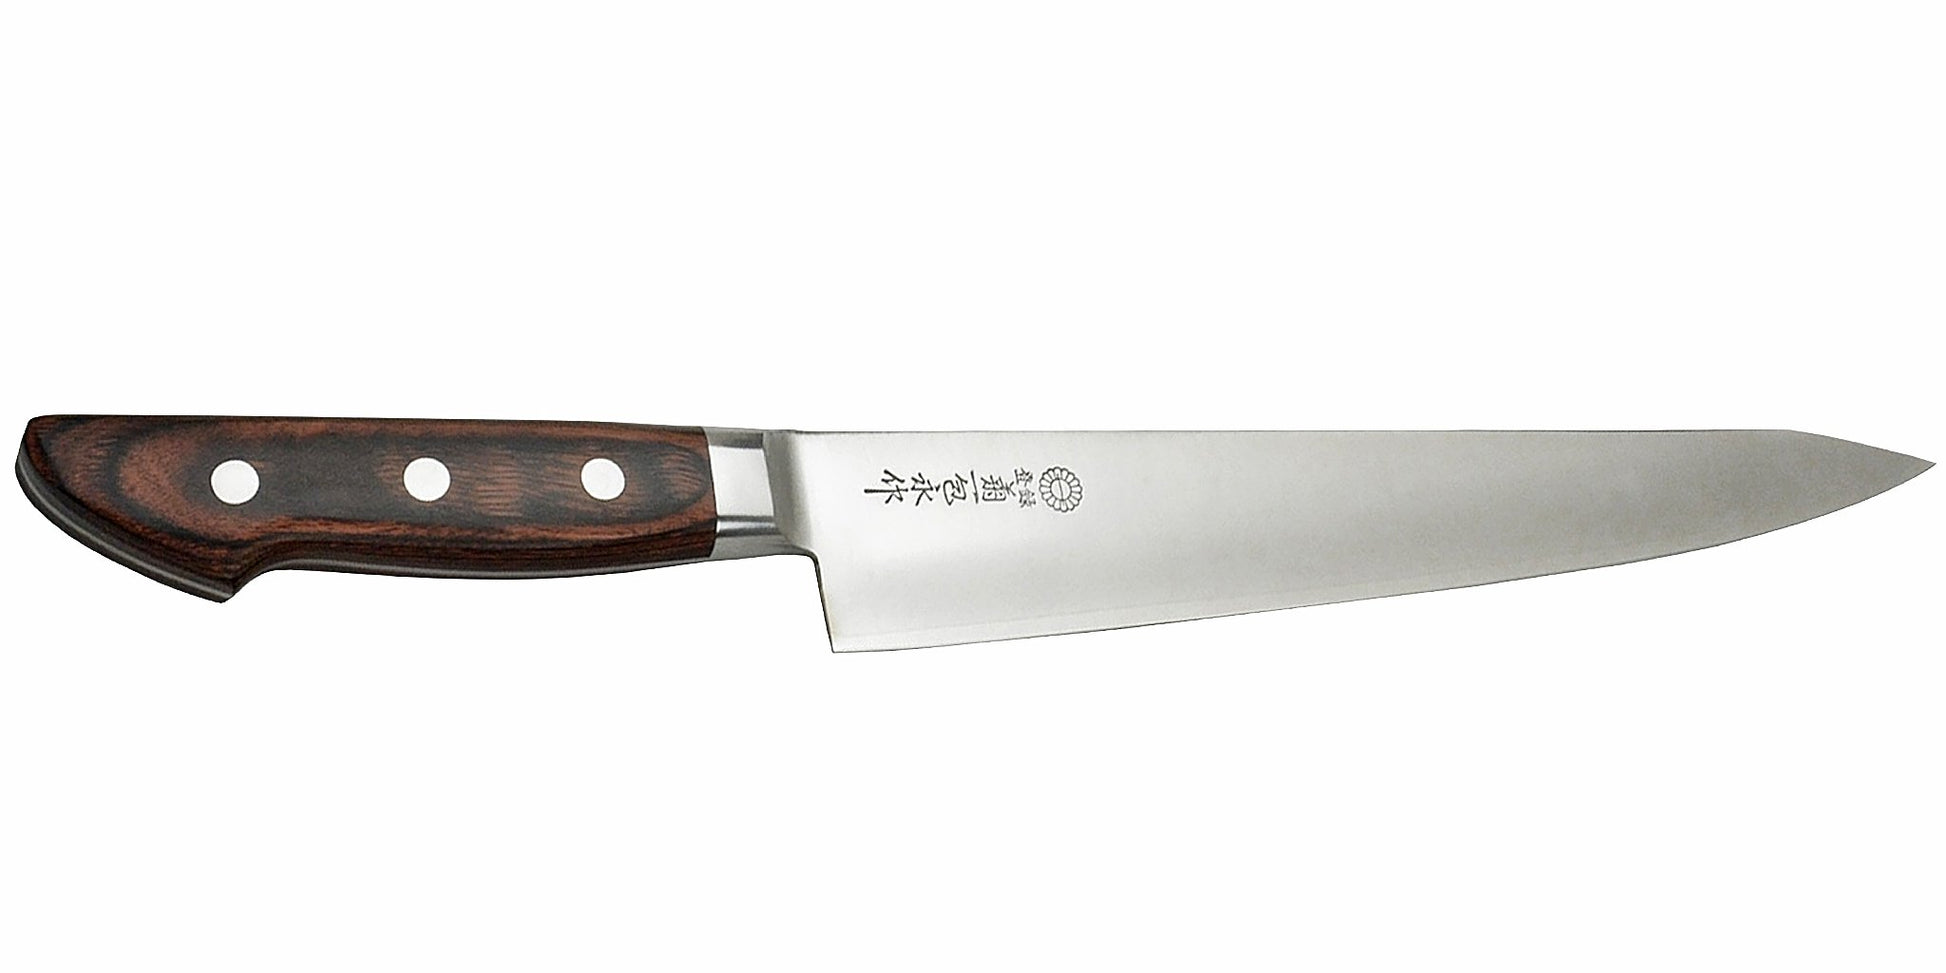 Kikuichi Cutlery Elite Warikomi Gold (WG Series) Sujihiki. Slicing knife made of VG1 stainless steel. Available in sizes 21 cm, 24 cm, and 27 cm.